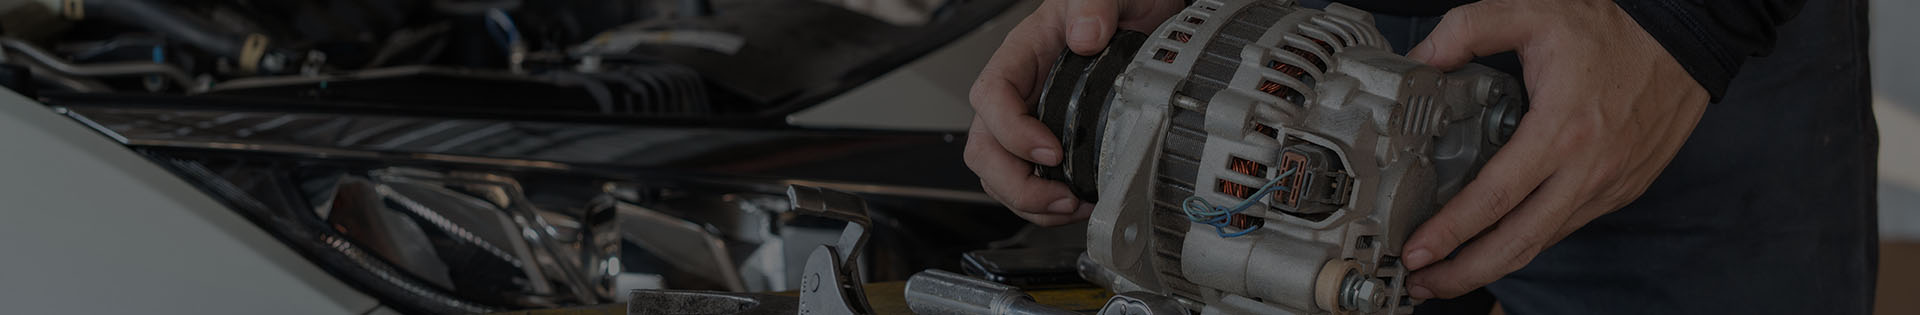 Auto Alternator Repair and Replacement in Albany, CA - Adams Autoworx Albany